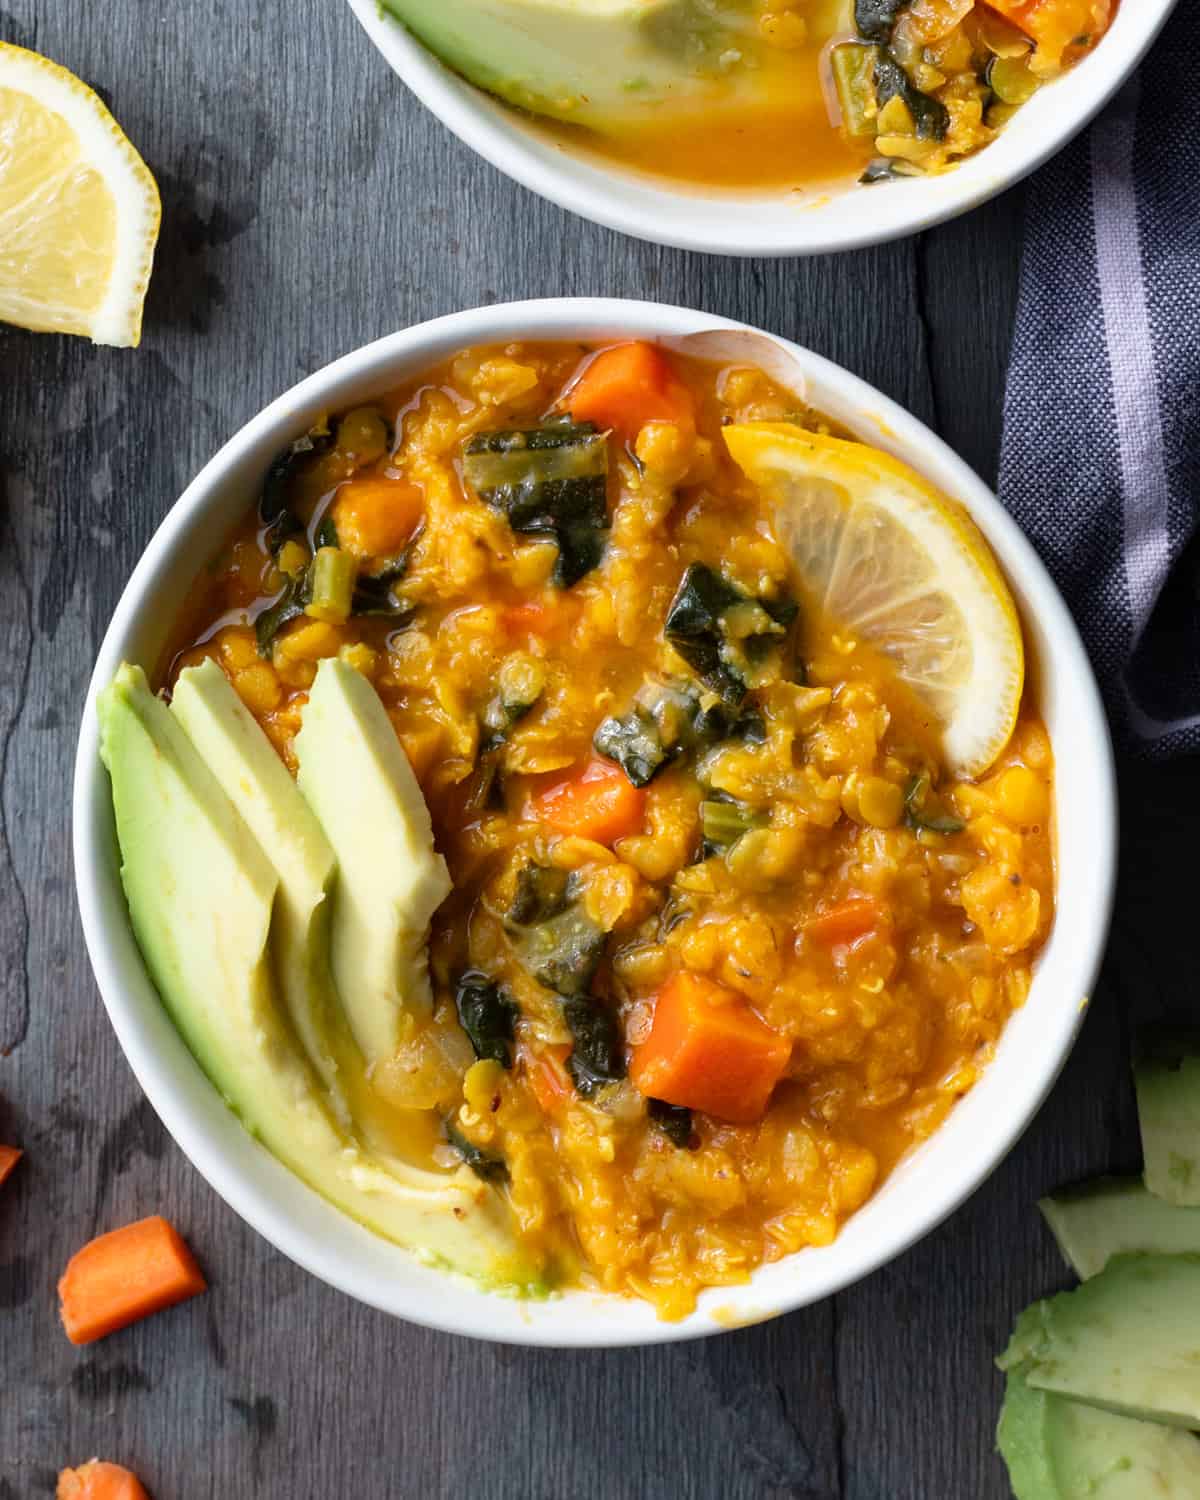 Image of two bowls of lemony lentil keto-friendly stew. This stew is made with carrots, kale and red lentils in the instant pot. The bowls are sitting on a table